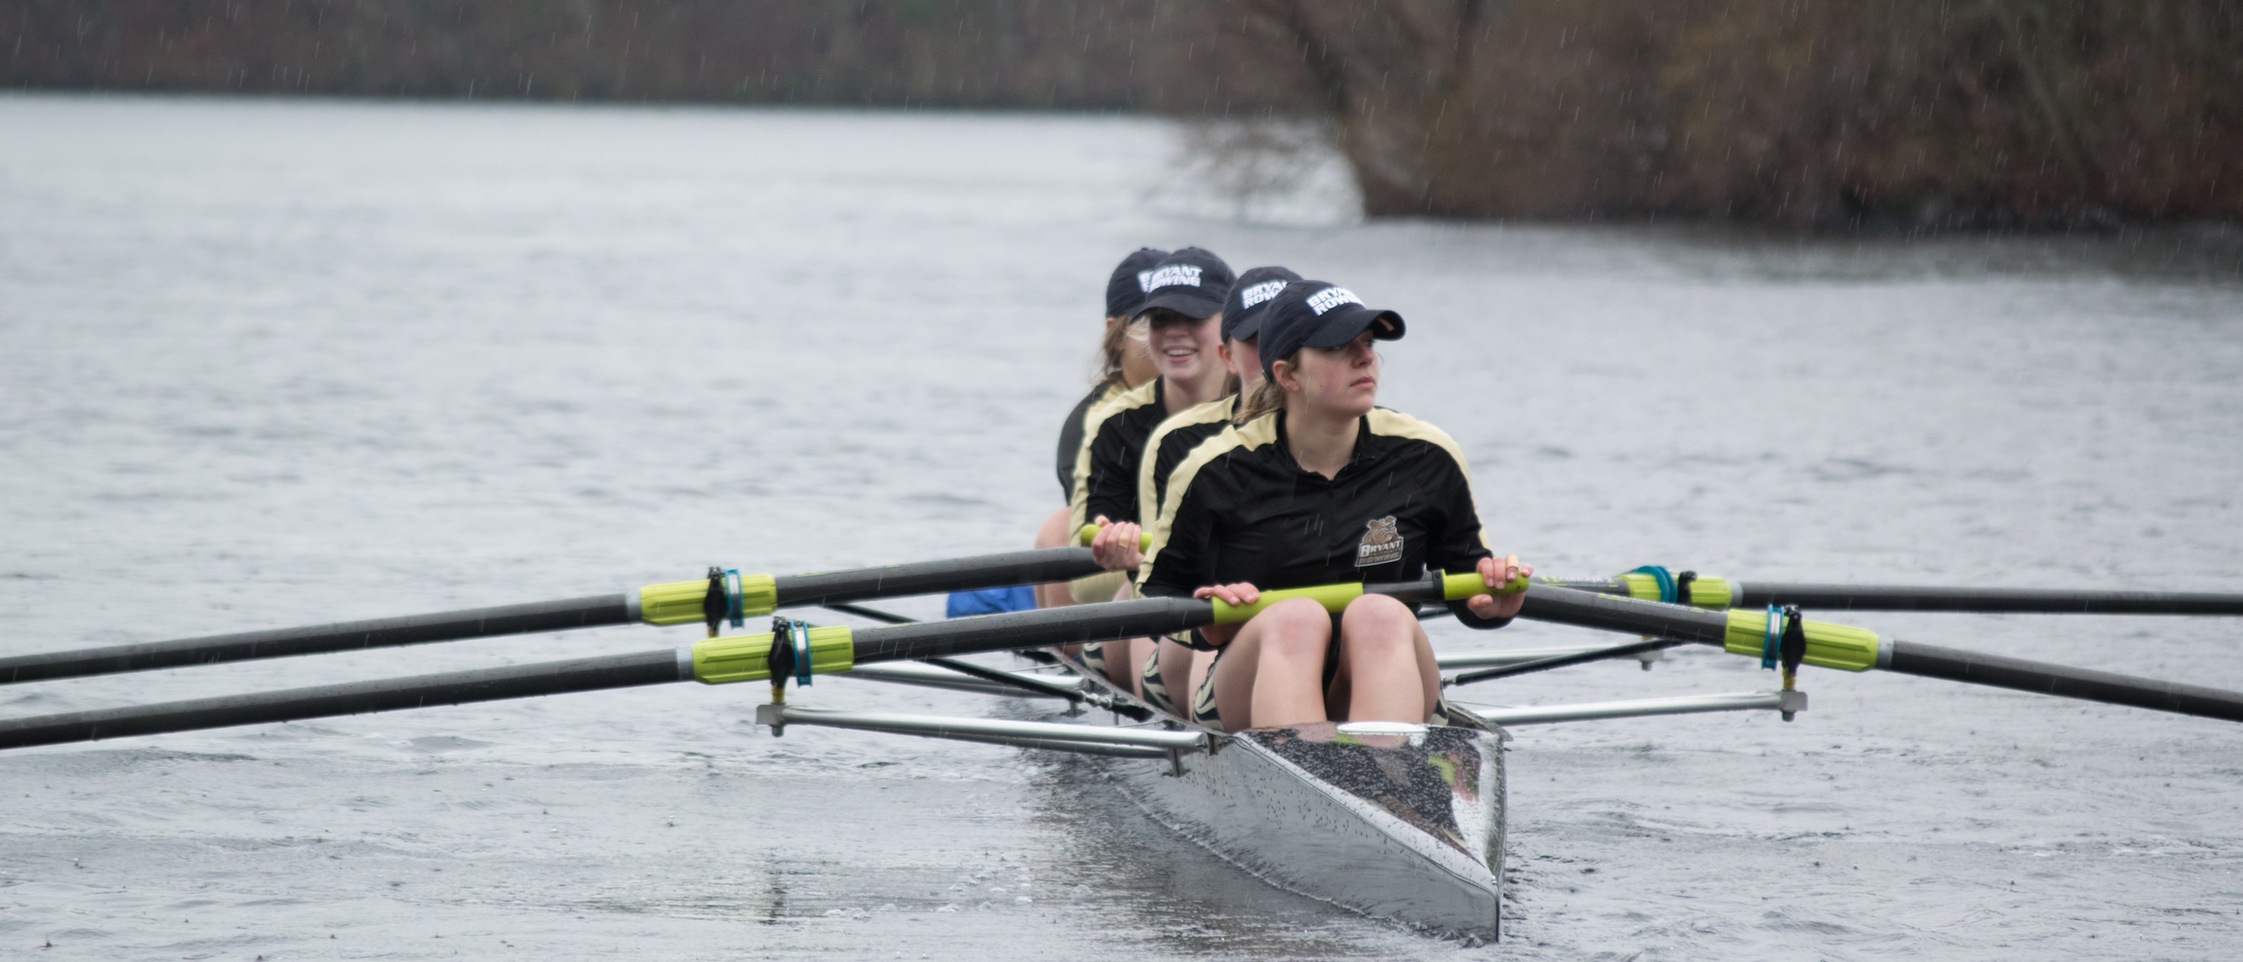 ROWING SUMS UP YEAR AFTER SPRING SEASON CANCELLATION